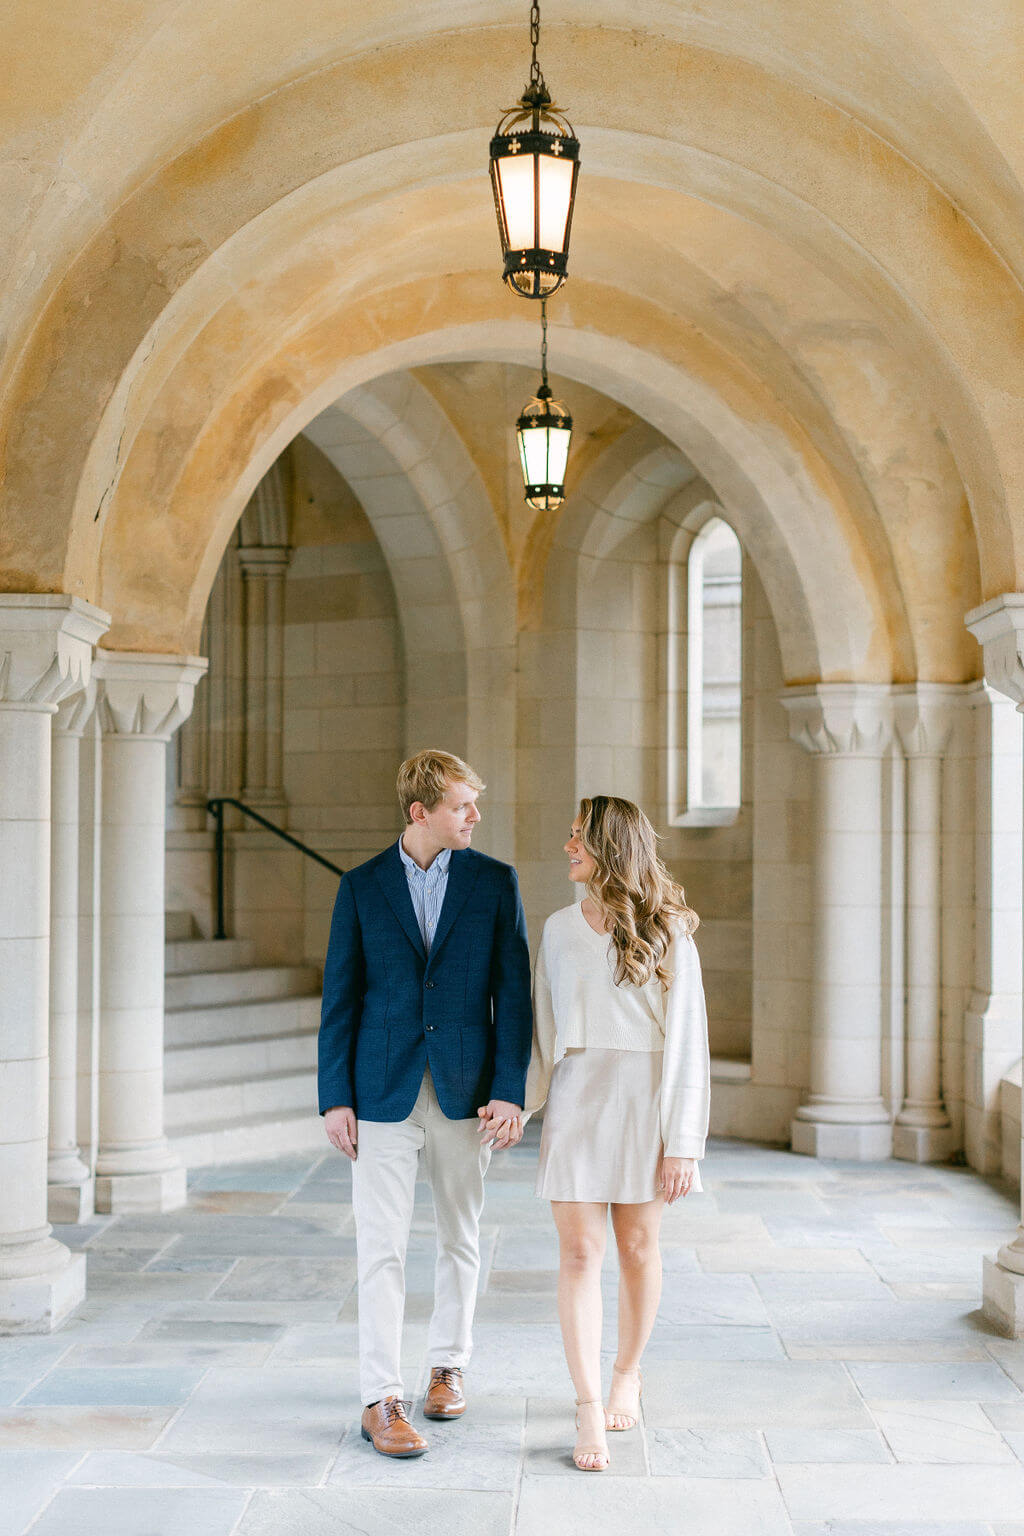 Engagement Session at Washington's National Cathedral: Joan and Richard share a moment, walking hand-in-hand under the archways, with the warm glow of a lantern above them, captured by Get Ready Photo.